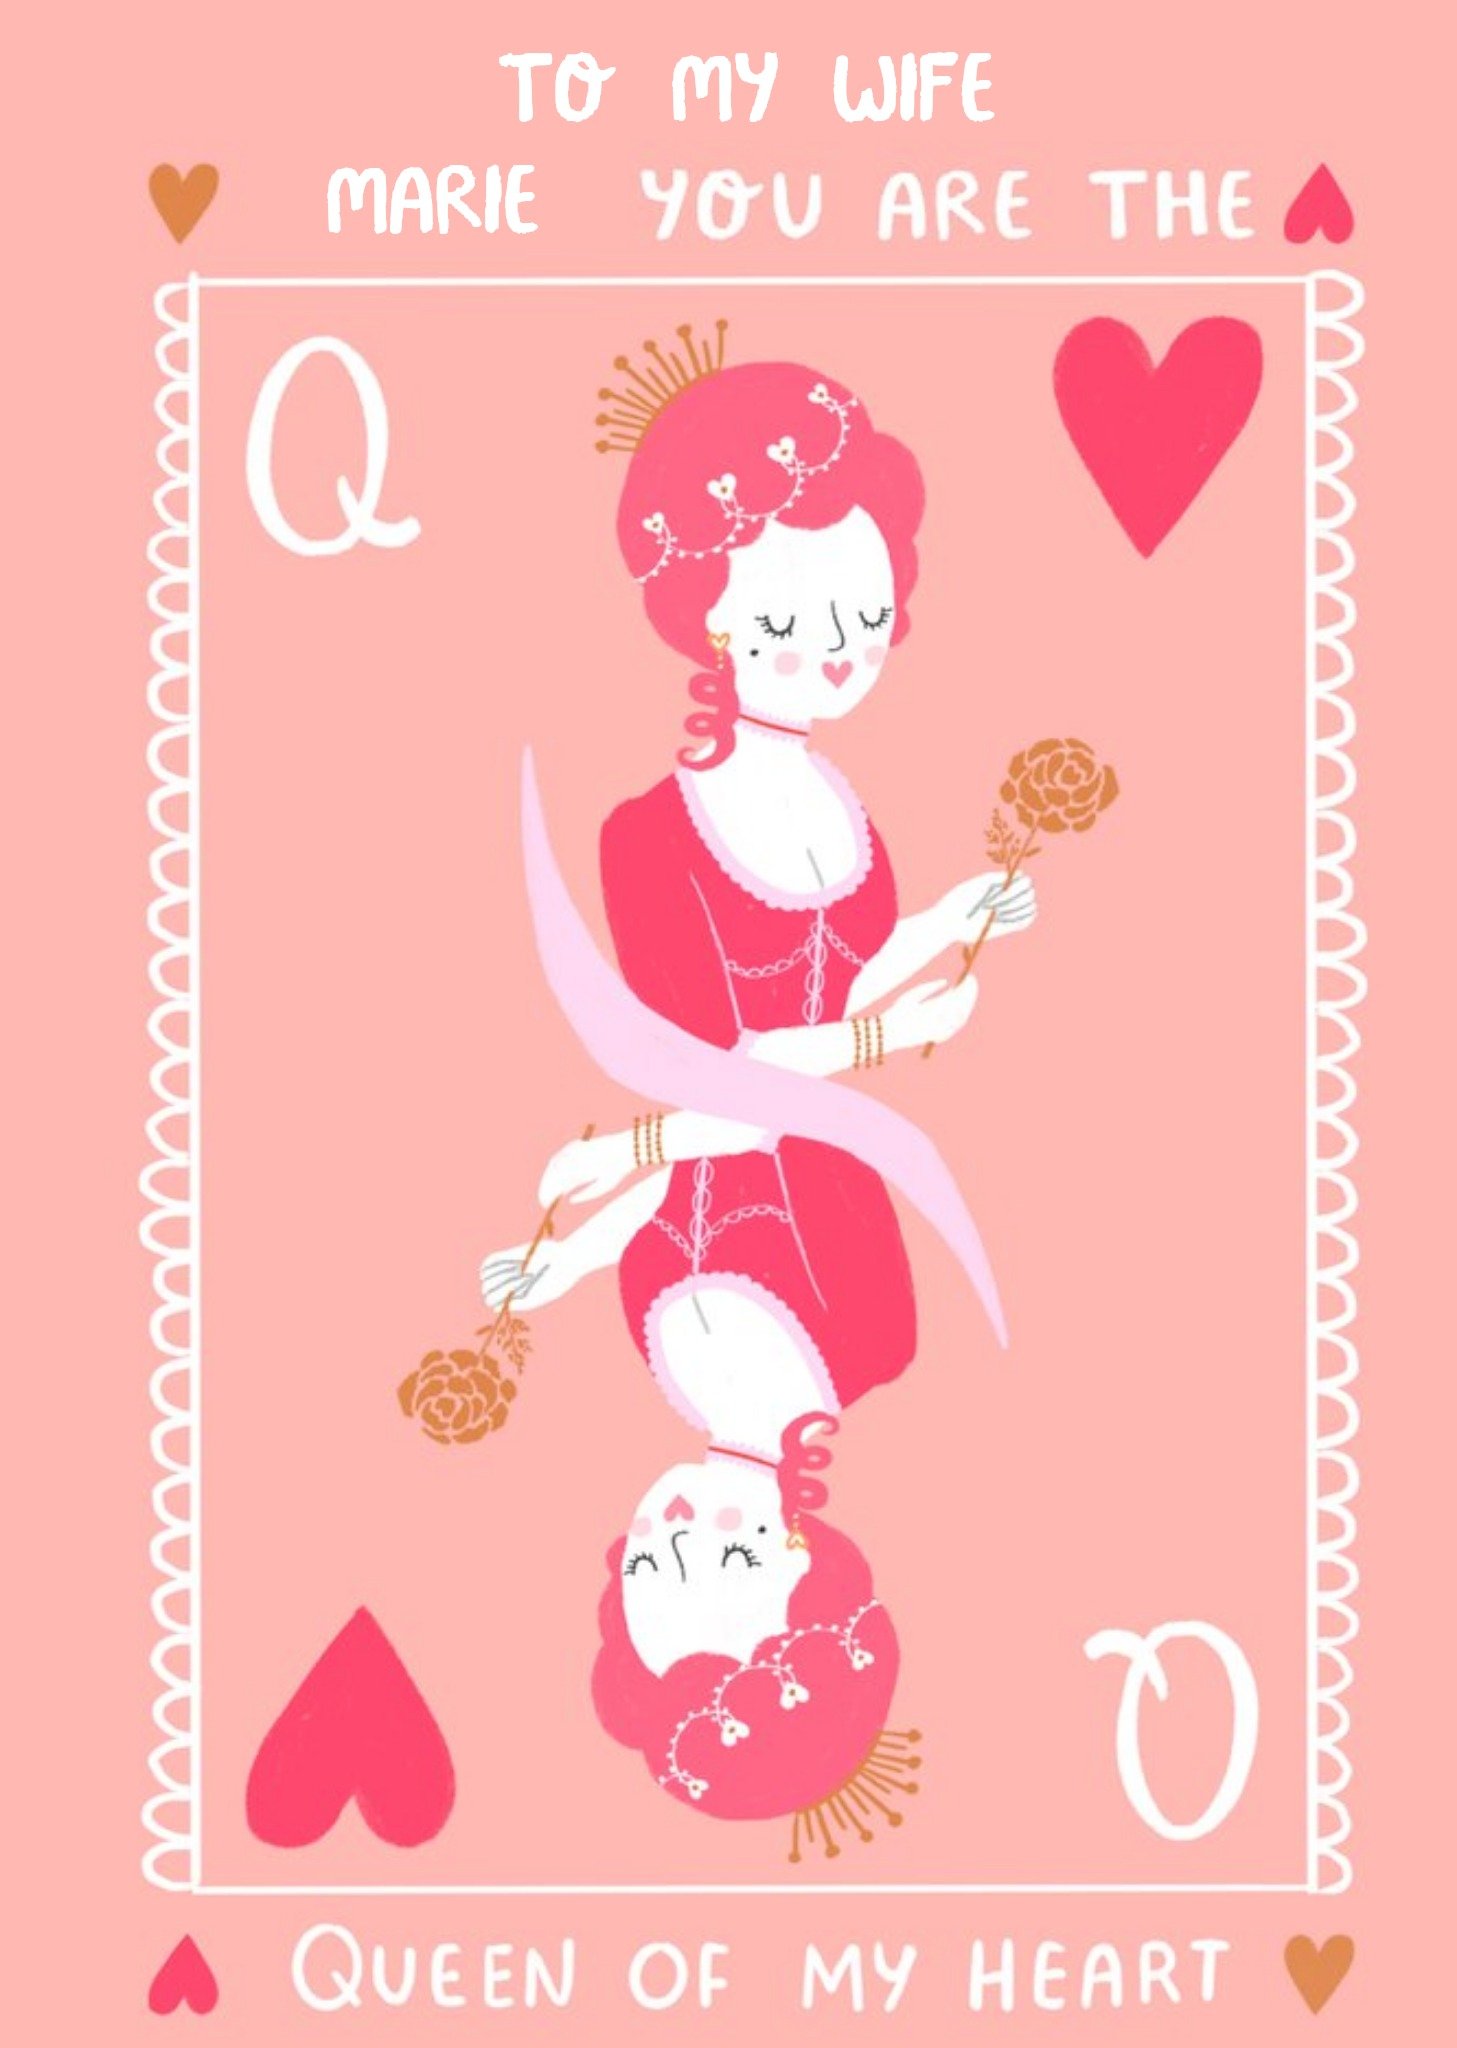 Moonpig Millicent Venton Queen Of My Heart To My Wife Valentines Day Card Ecard